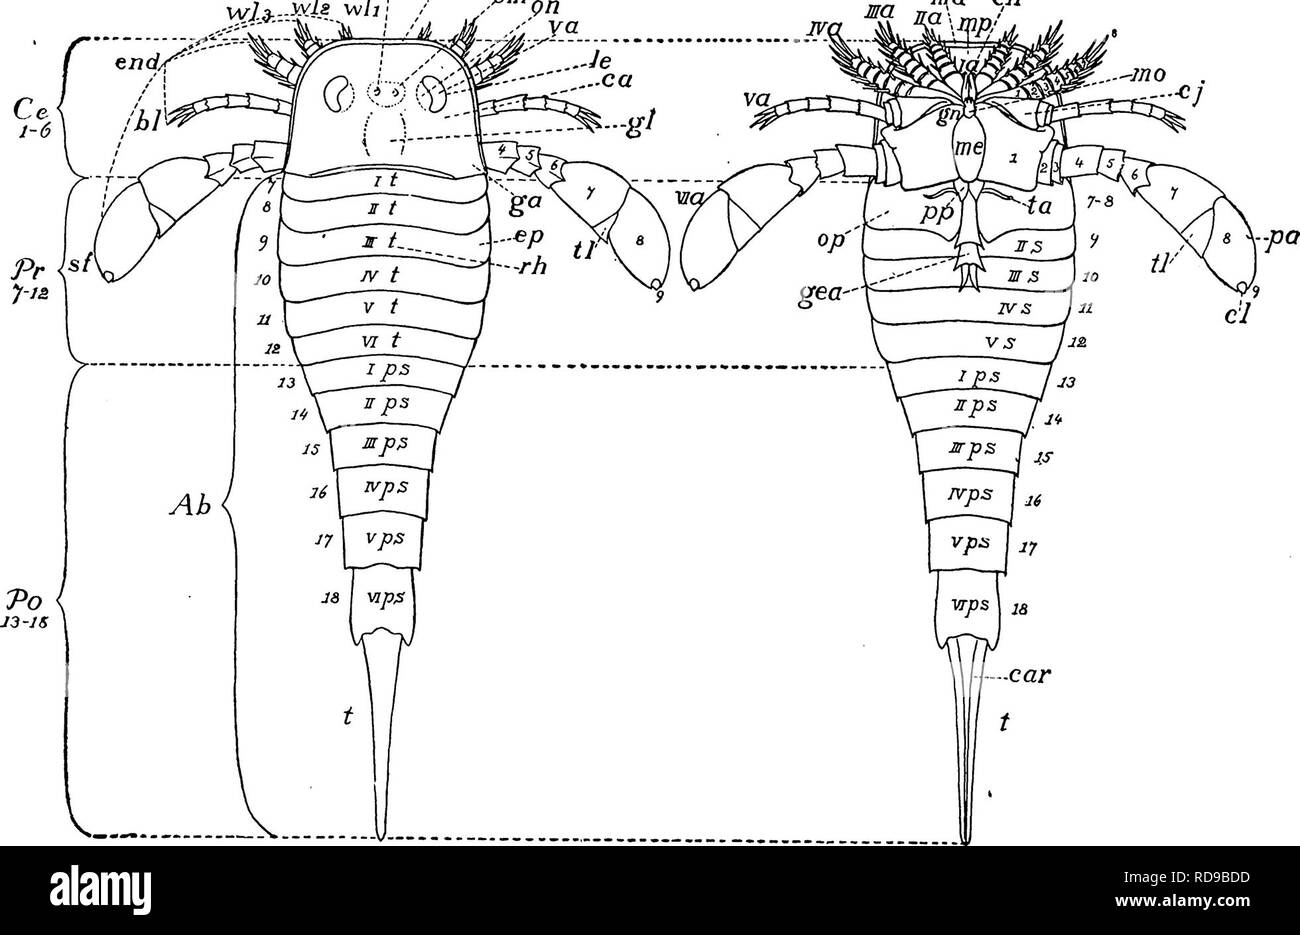 . The Eurypterida of New York. Eurypterida; Paleontology. 24 NEW YORK STATE MUSEUM A/].^,--,^J.s.,^^h 0 r pm iid ch. Figure 2 Diagram of an Eurypterid a; la- Via = appendages or legs Ab = abdomen bl = balancing leg ca = carapace or head shield car = carina of telson Ce = cephalothorax or prosoma ch = chelicerae, la, preoral appendages or mandibles cj = coxa end = postOTsi[ appendages or endognathites ep = epimera or pleura of tergite ga = genal angle gea = genital appendage (female ) gl = glabella gn = gnathobase le = lateral or compound eyes md = marginal doublure me = metastoma or postoral Stock Photo